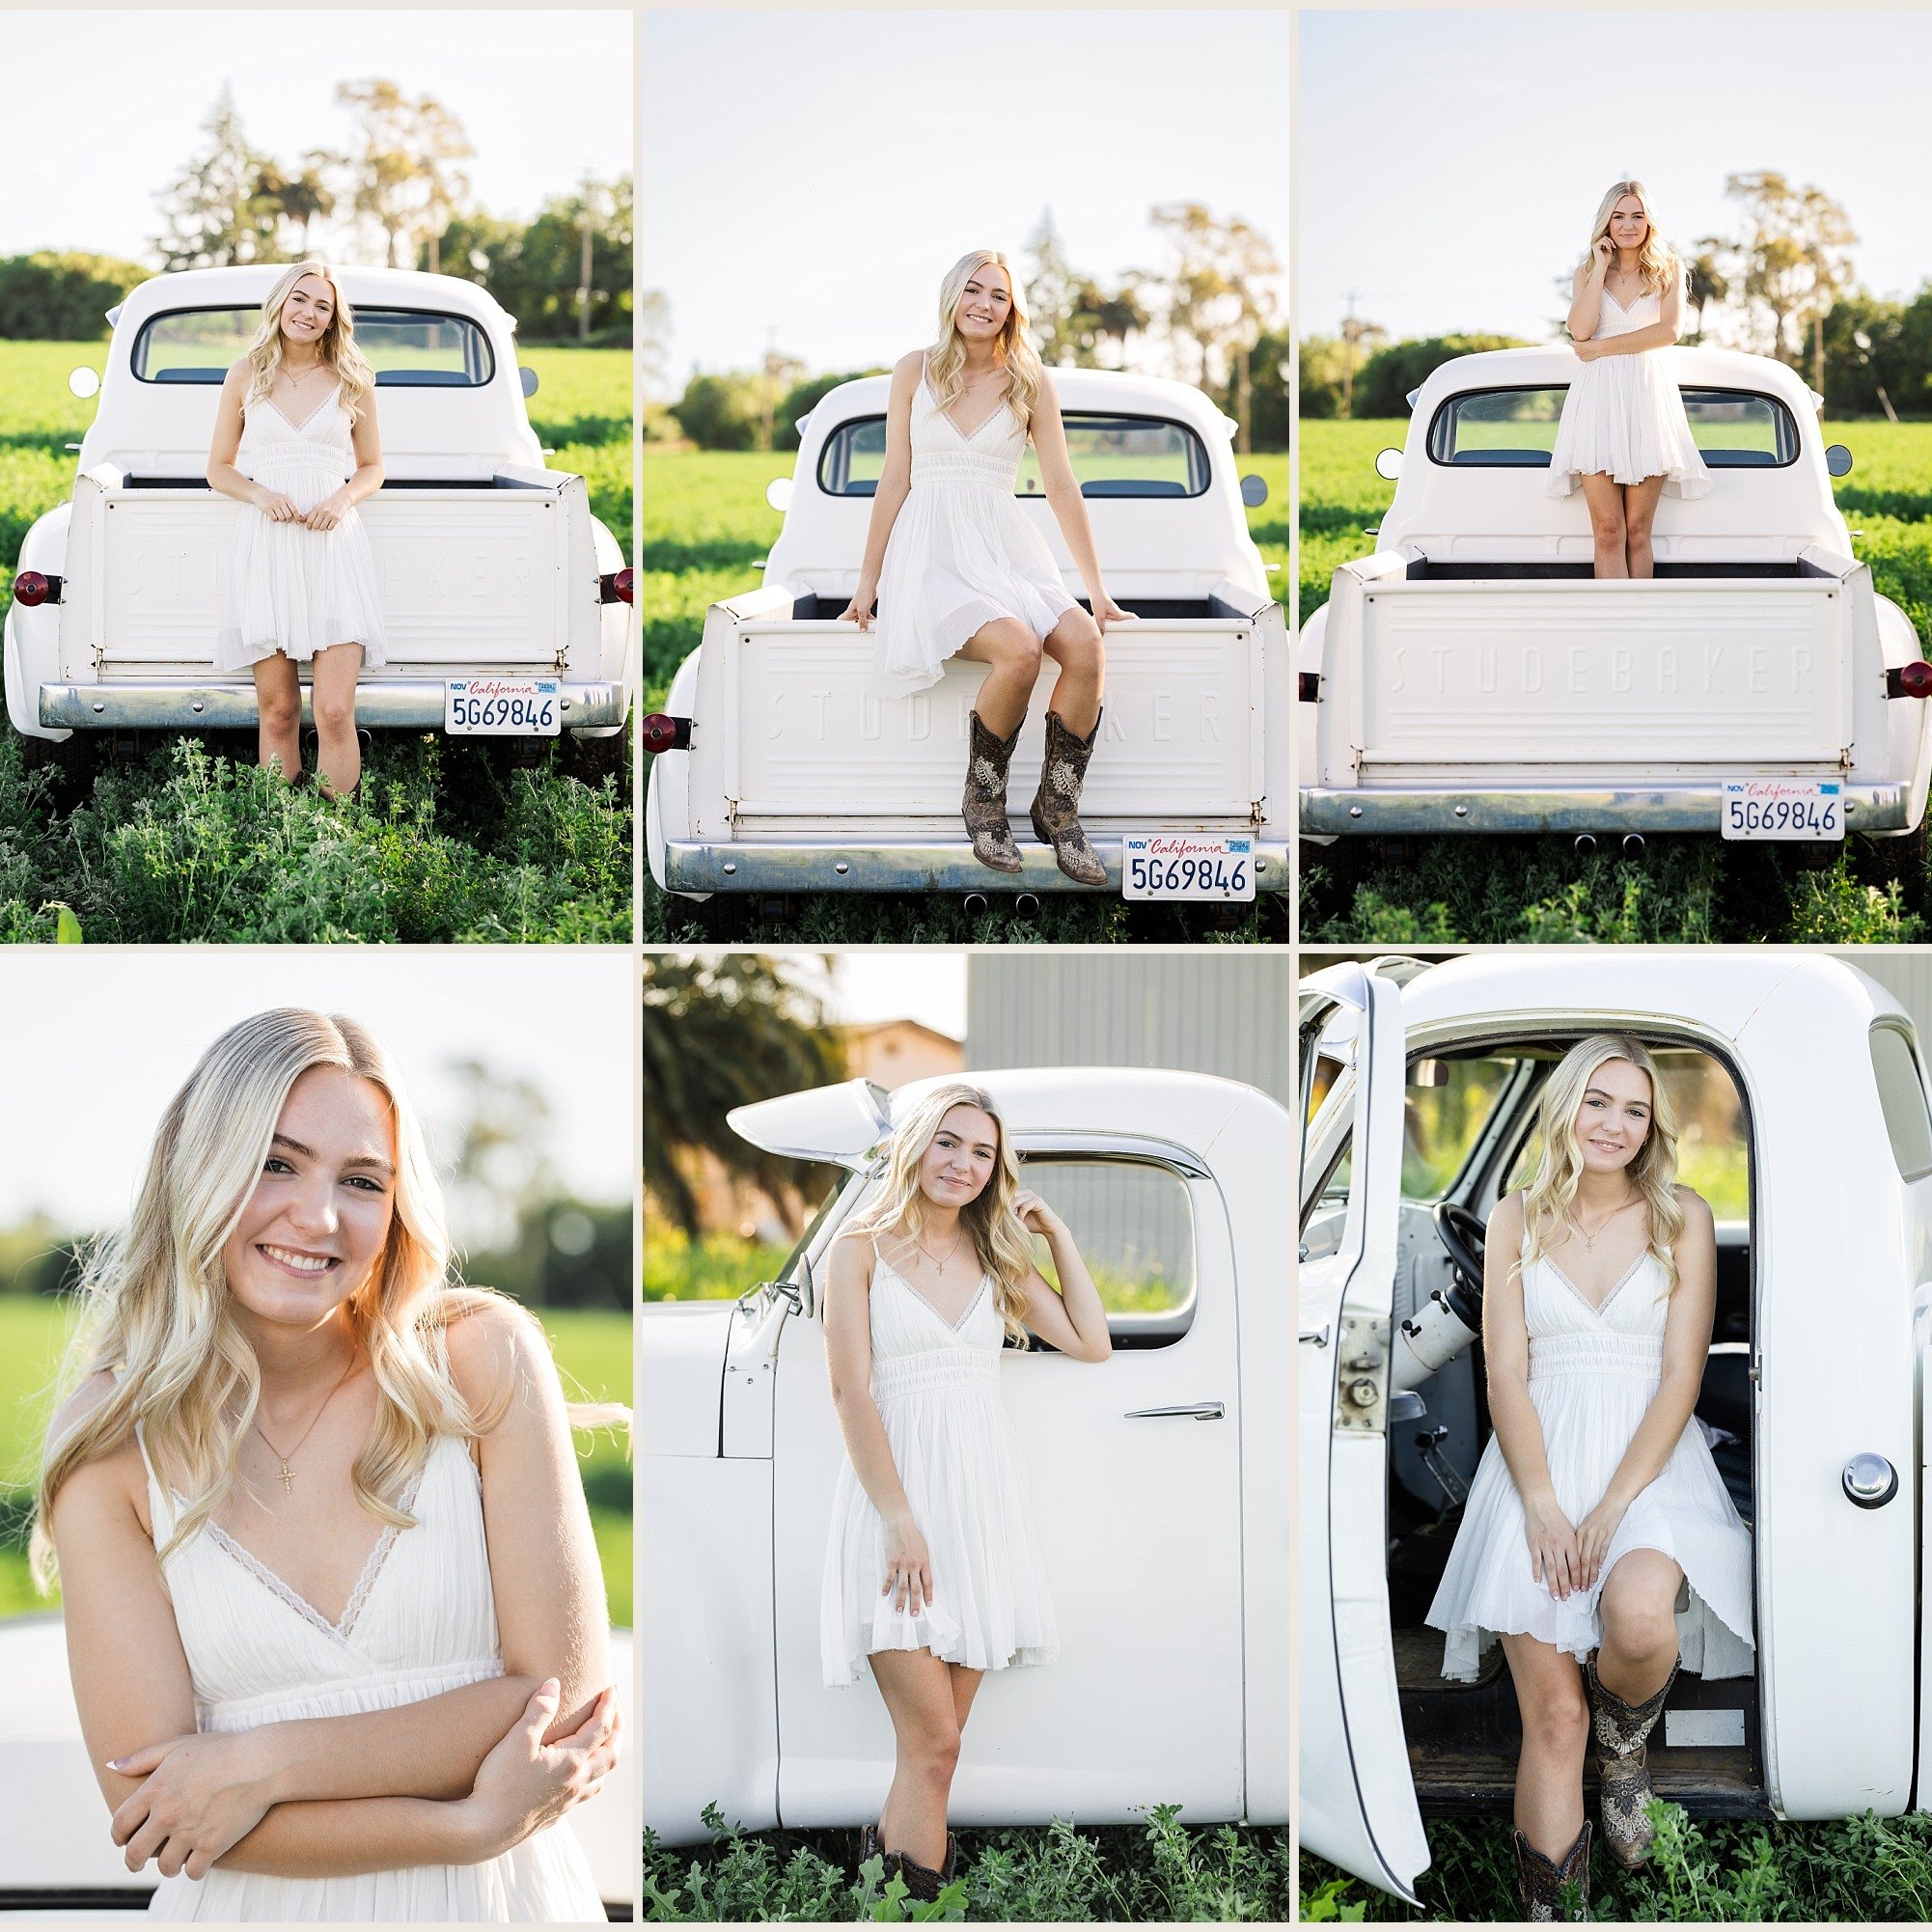 Presley's Country Charm: A Dairy Ranch Senior Portrait Session

I'm absolutely thrilled to share the highlights of Presley Clement's recent senior portraits session. It feels like just yesterday I had the honor of capturing her older sister, Macie's,